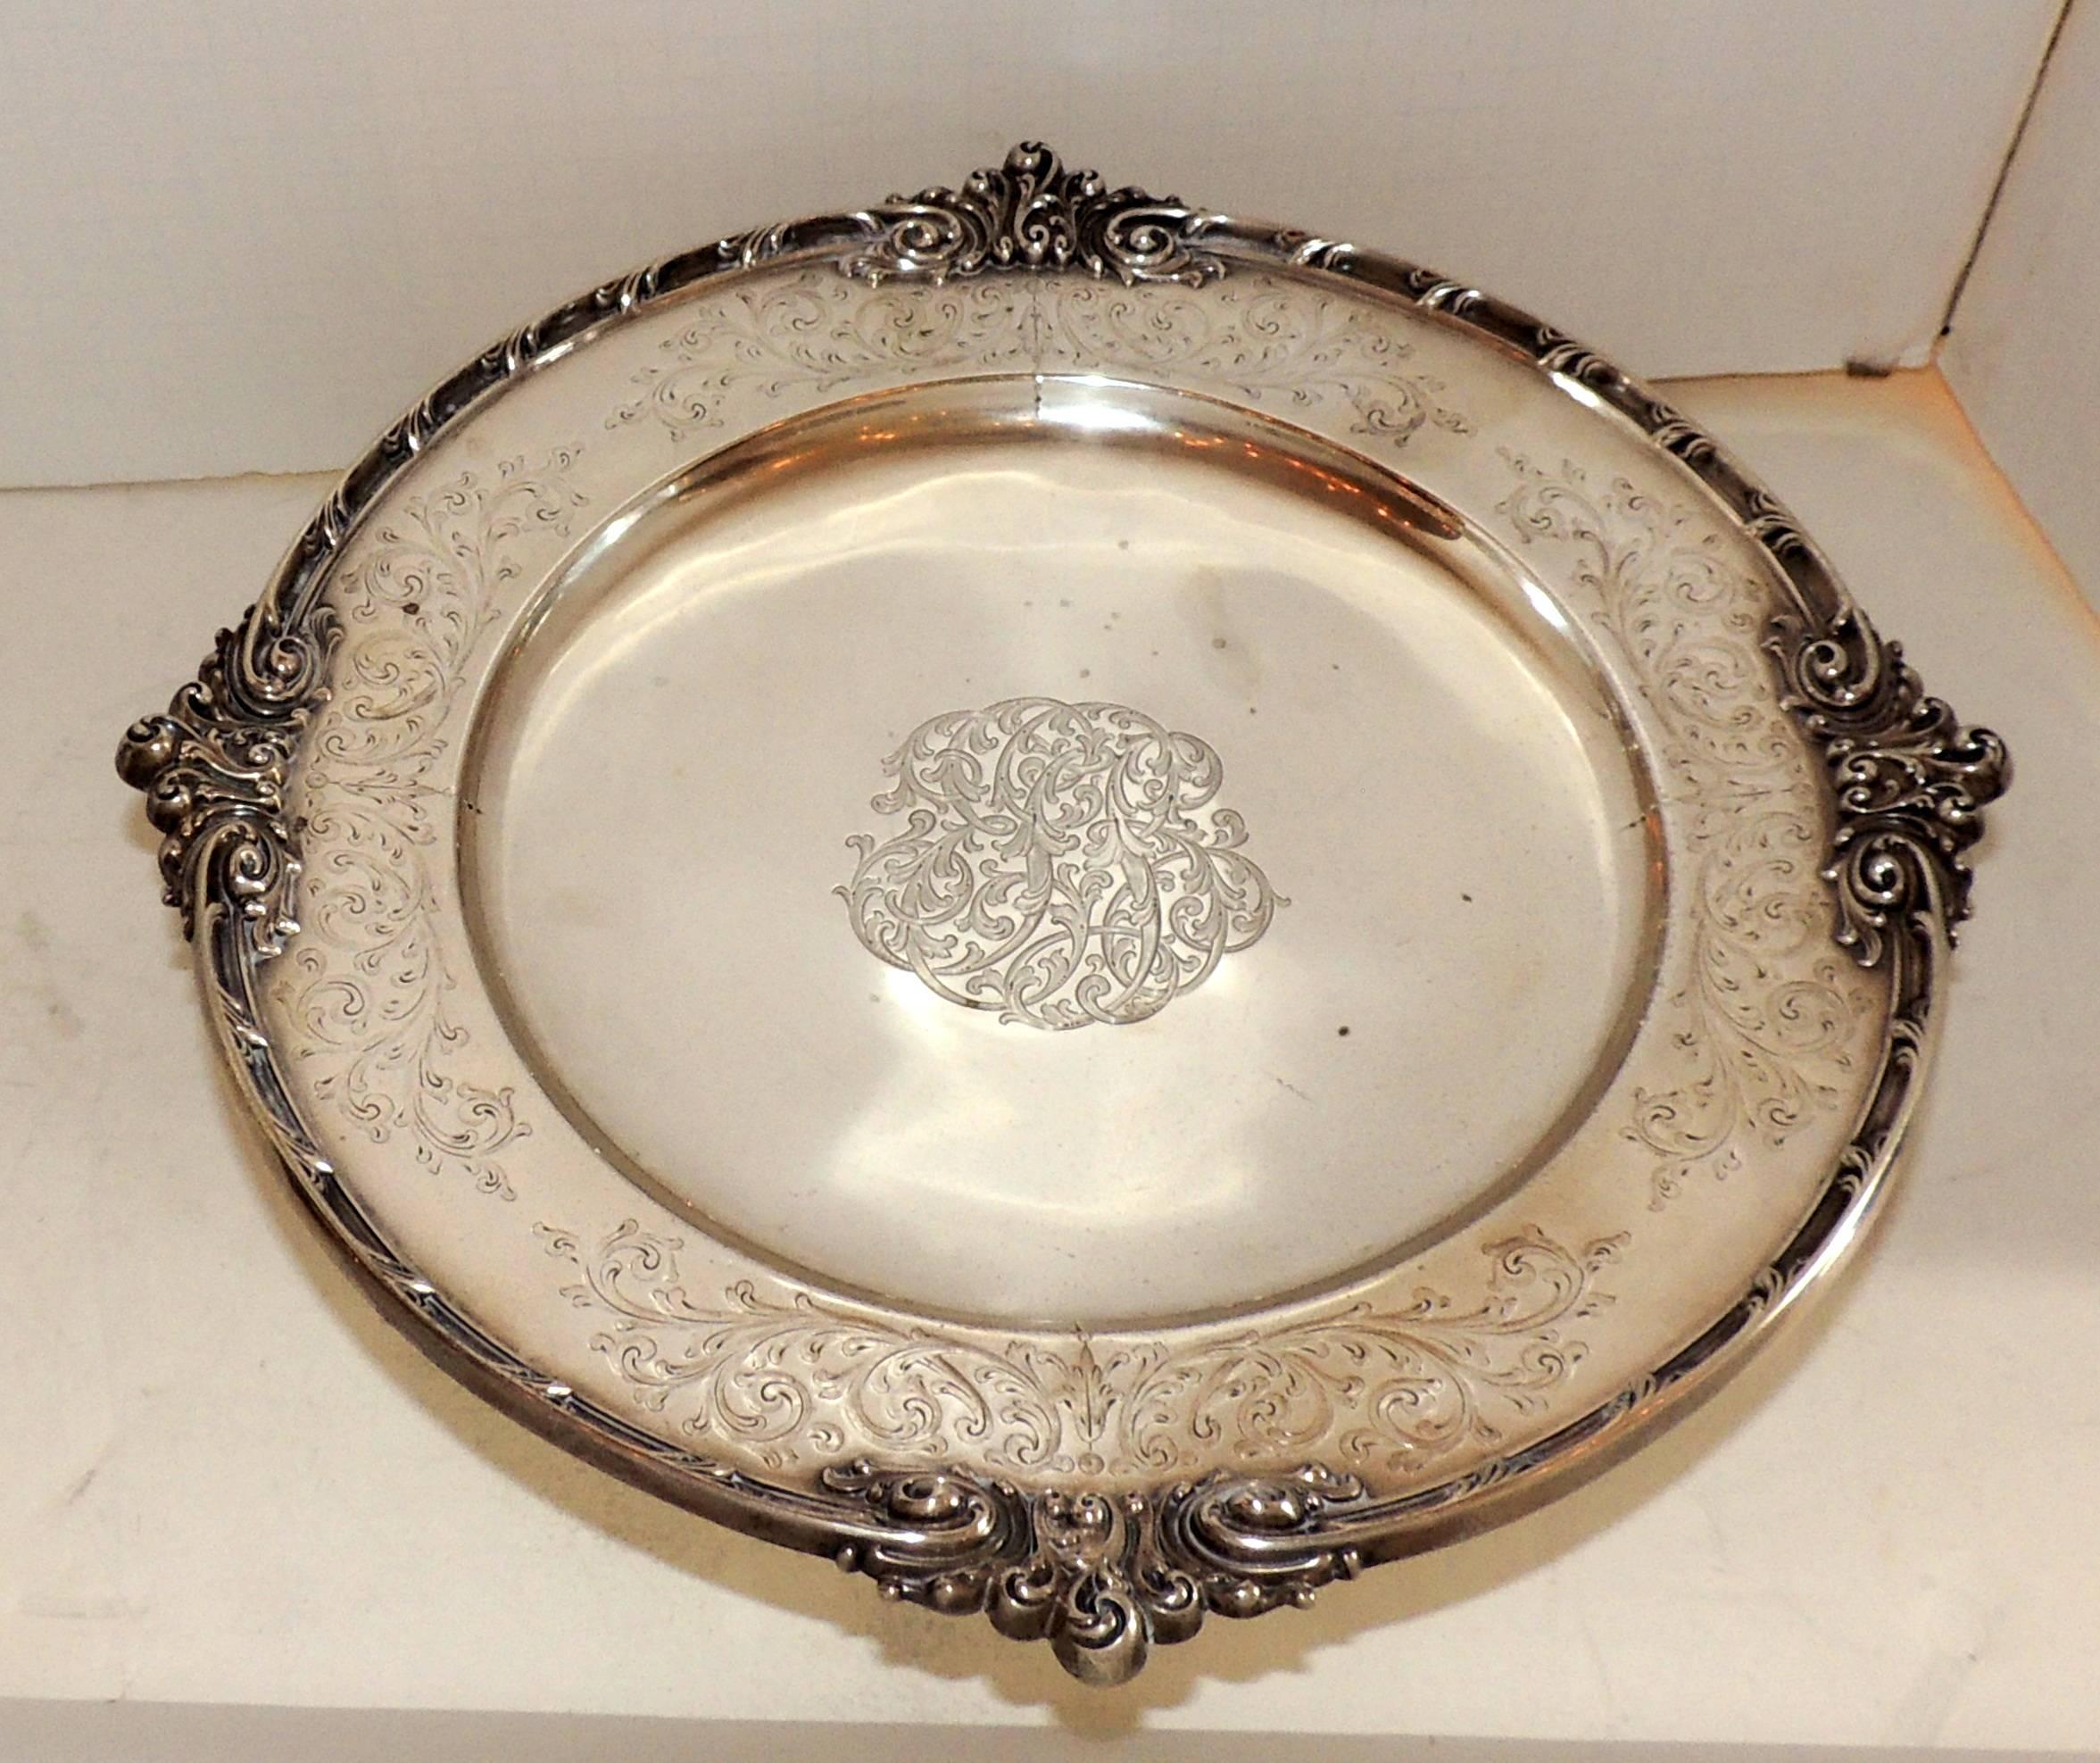 American Wonderful Black Star & Frost Sterling Silver Centerpiece Cake Stand Plate Dish 